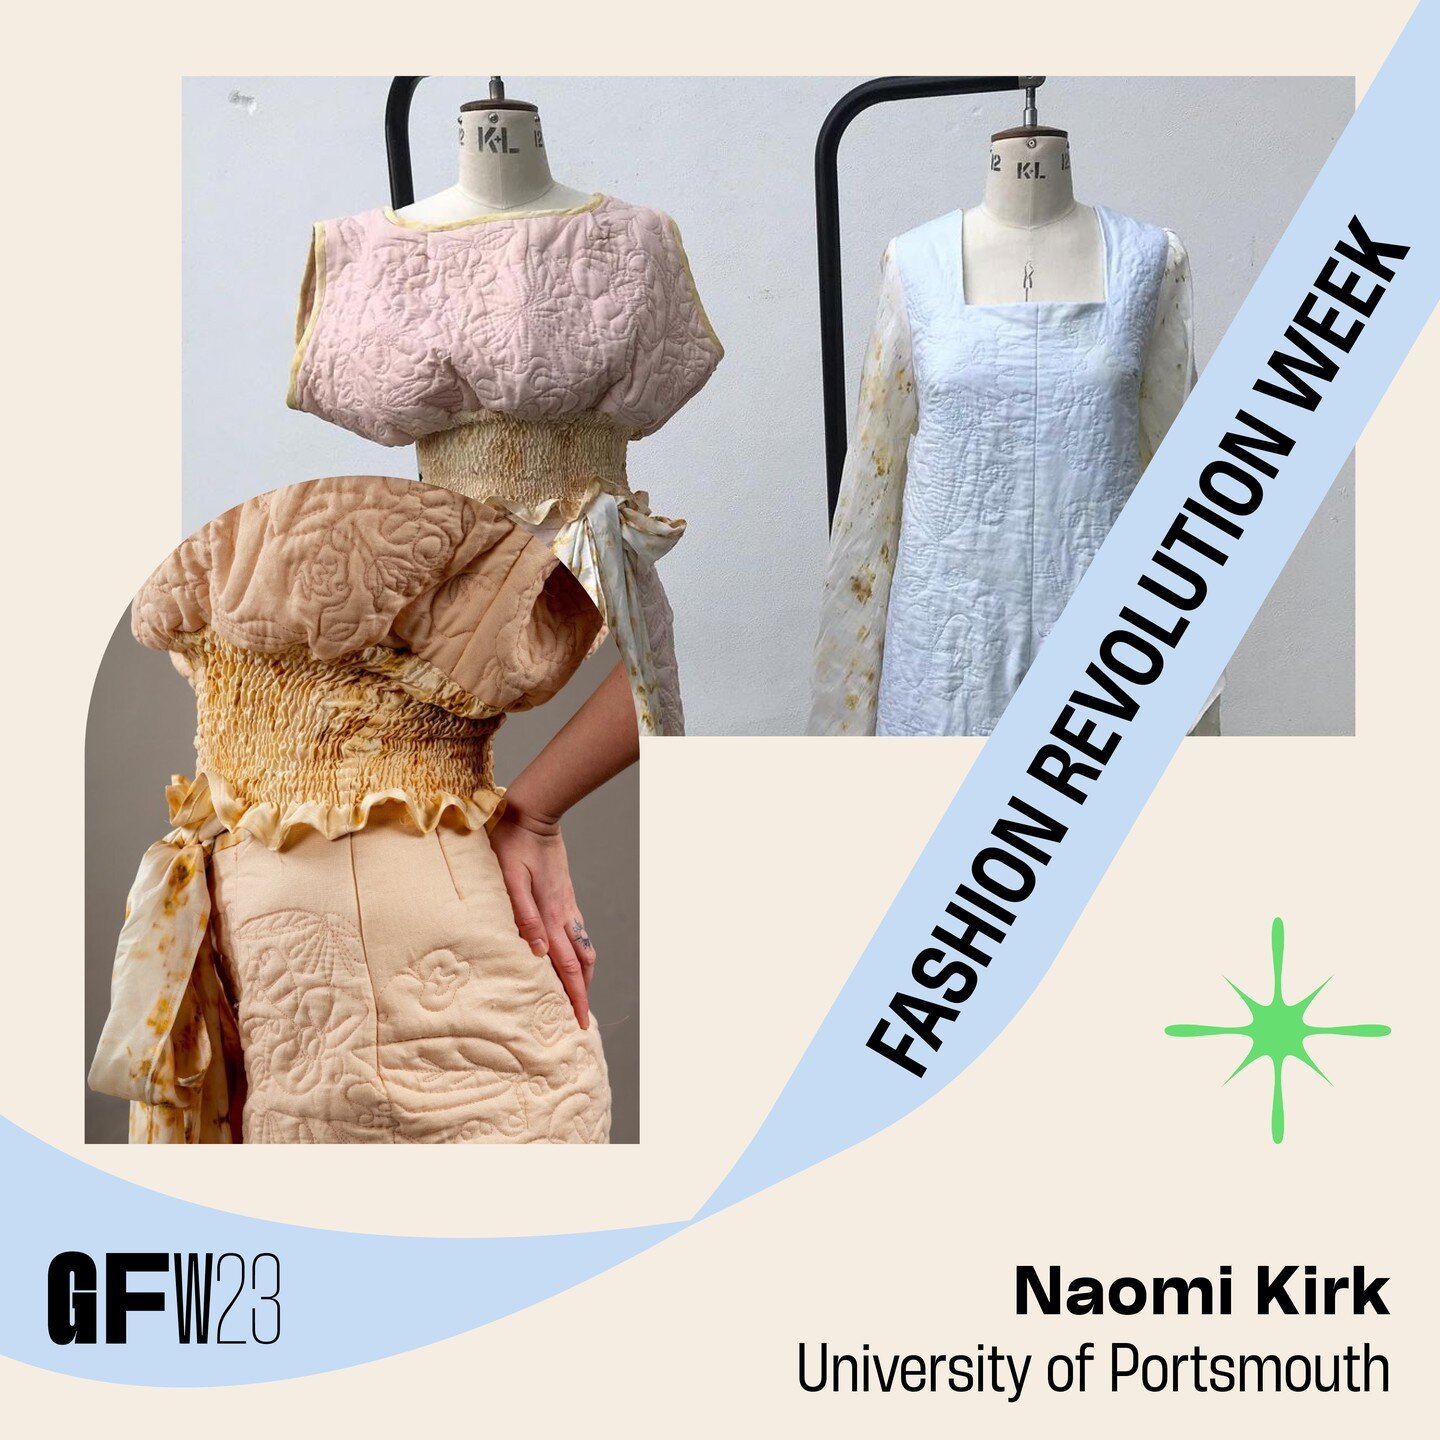 To celebrate #FashionRevolutionWeek we're highlighting student work that centres around fashion activism 👏

Naomi Kirk is a Fashion student at the University of Portsmouth and their collection is focused on used on regenerative fashion and respectin